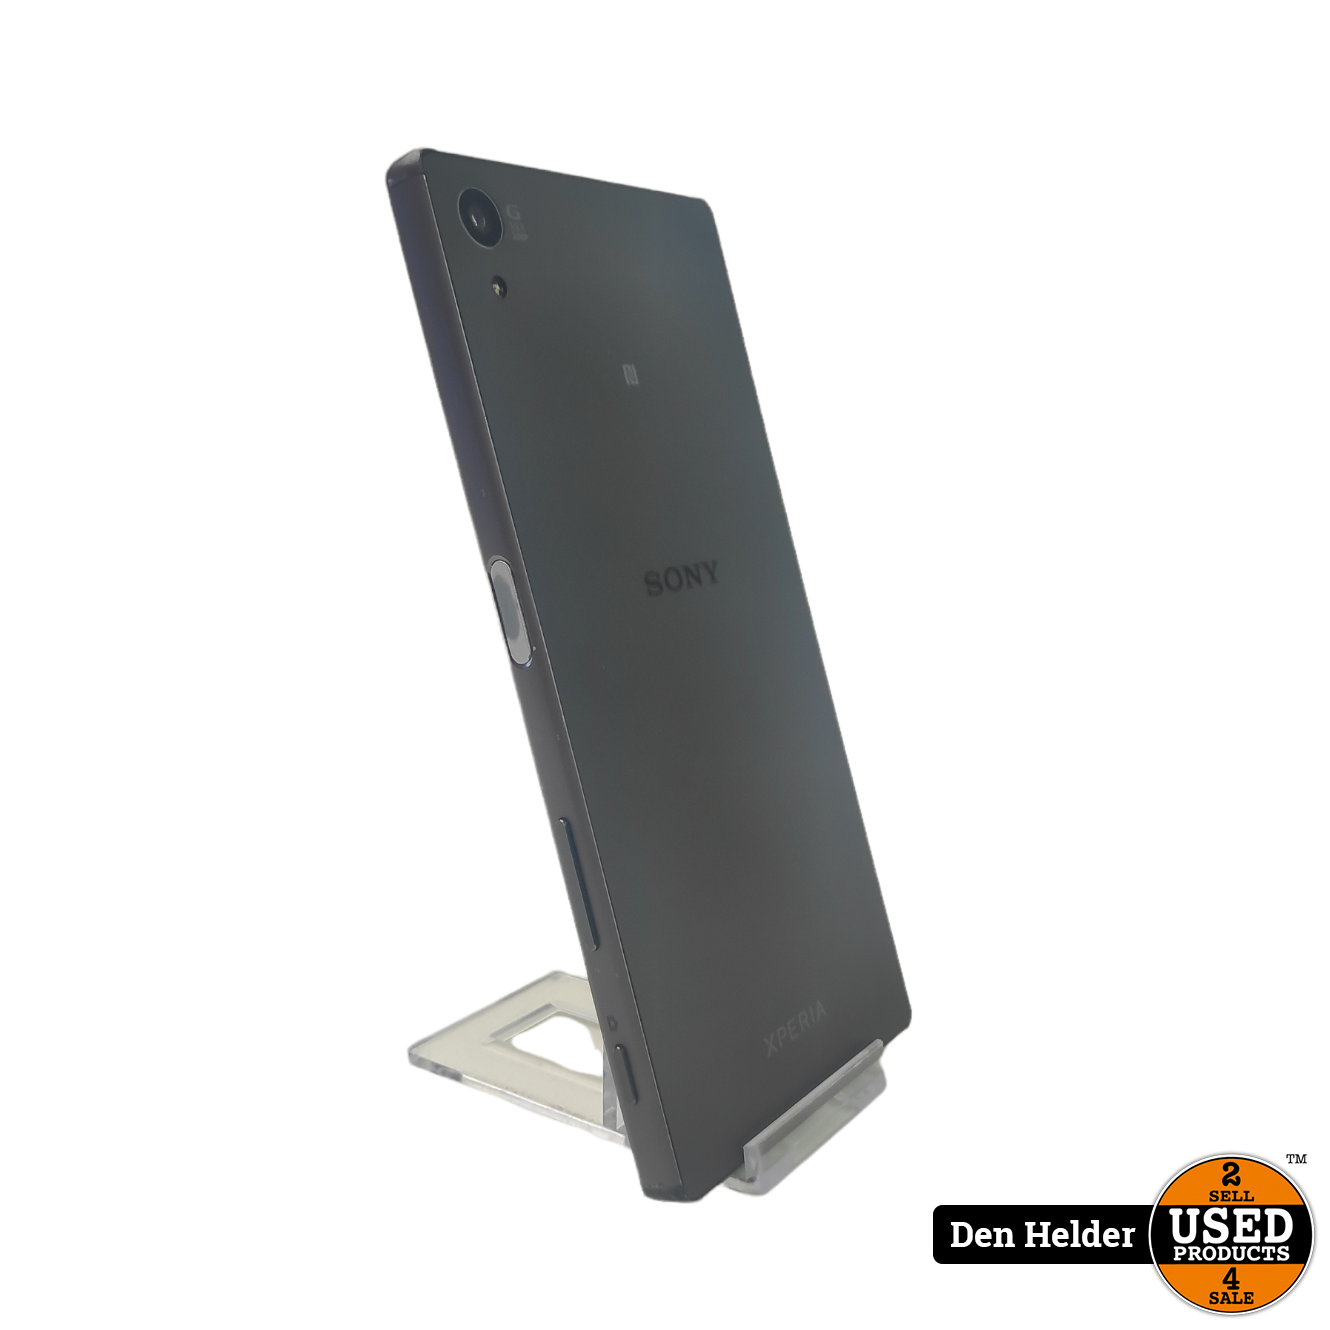 Hallo Christchurch Quagga Sony Xperia Z5 32GB Android 7 - In Goede Staat - Used Products Den Helder